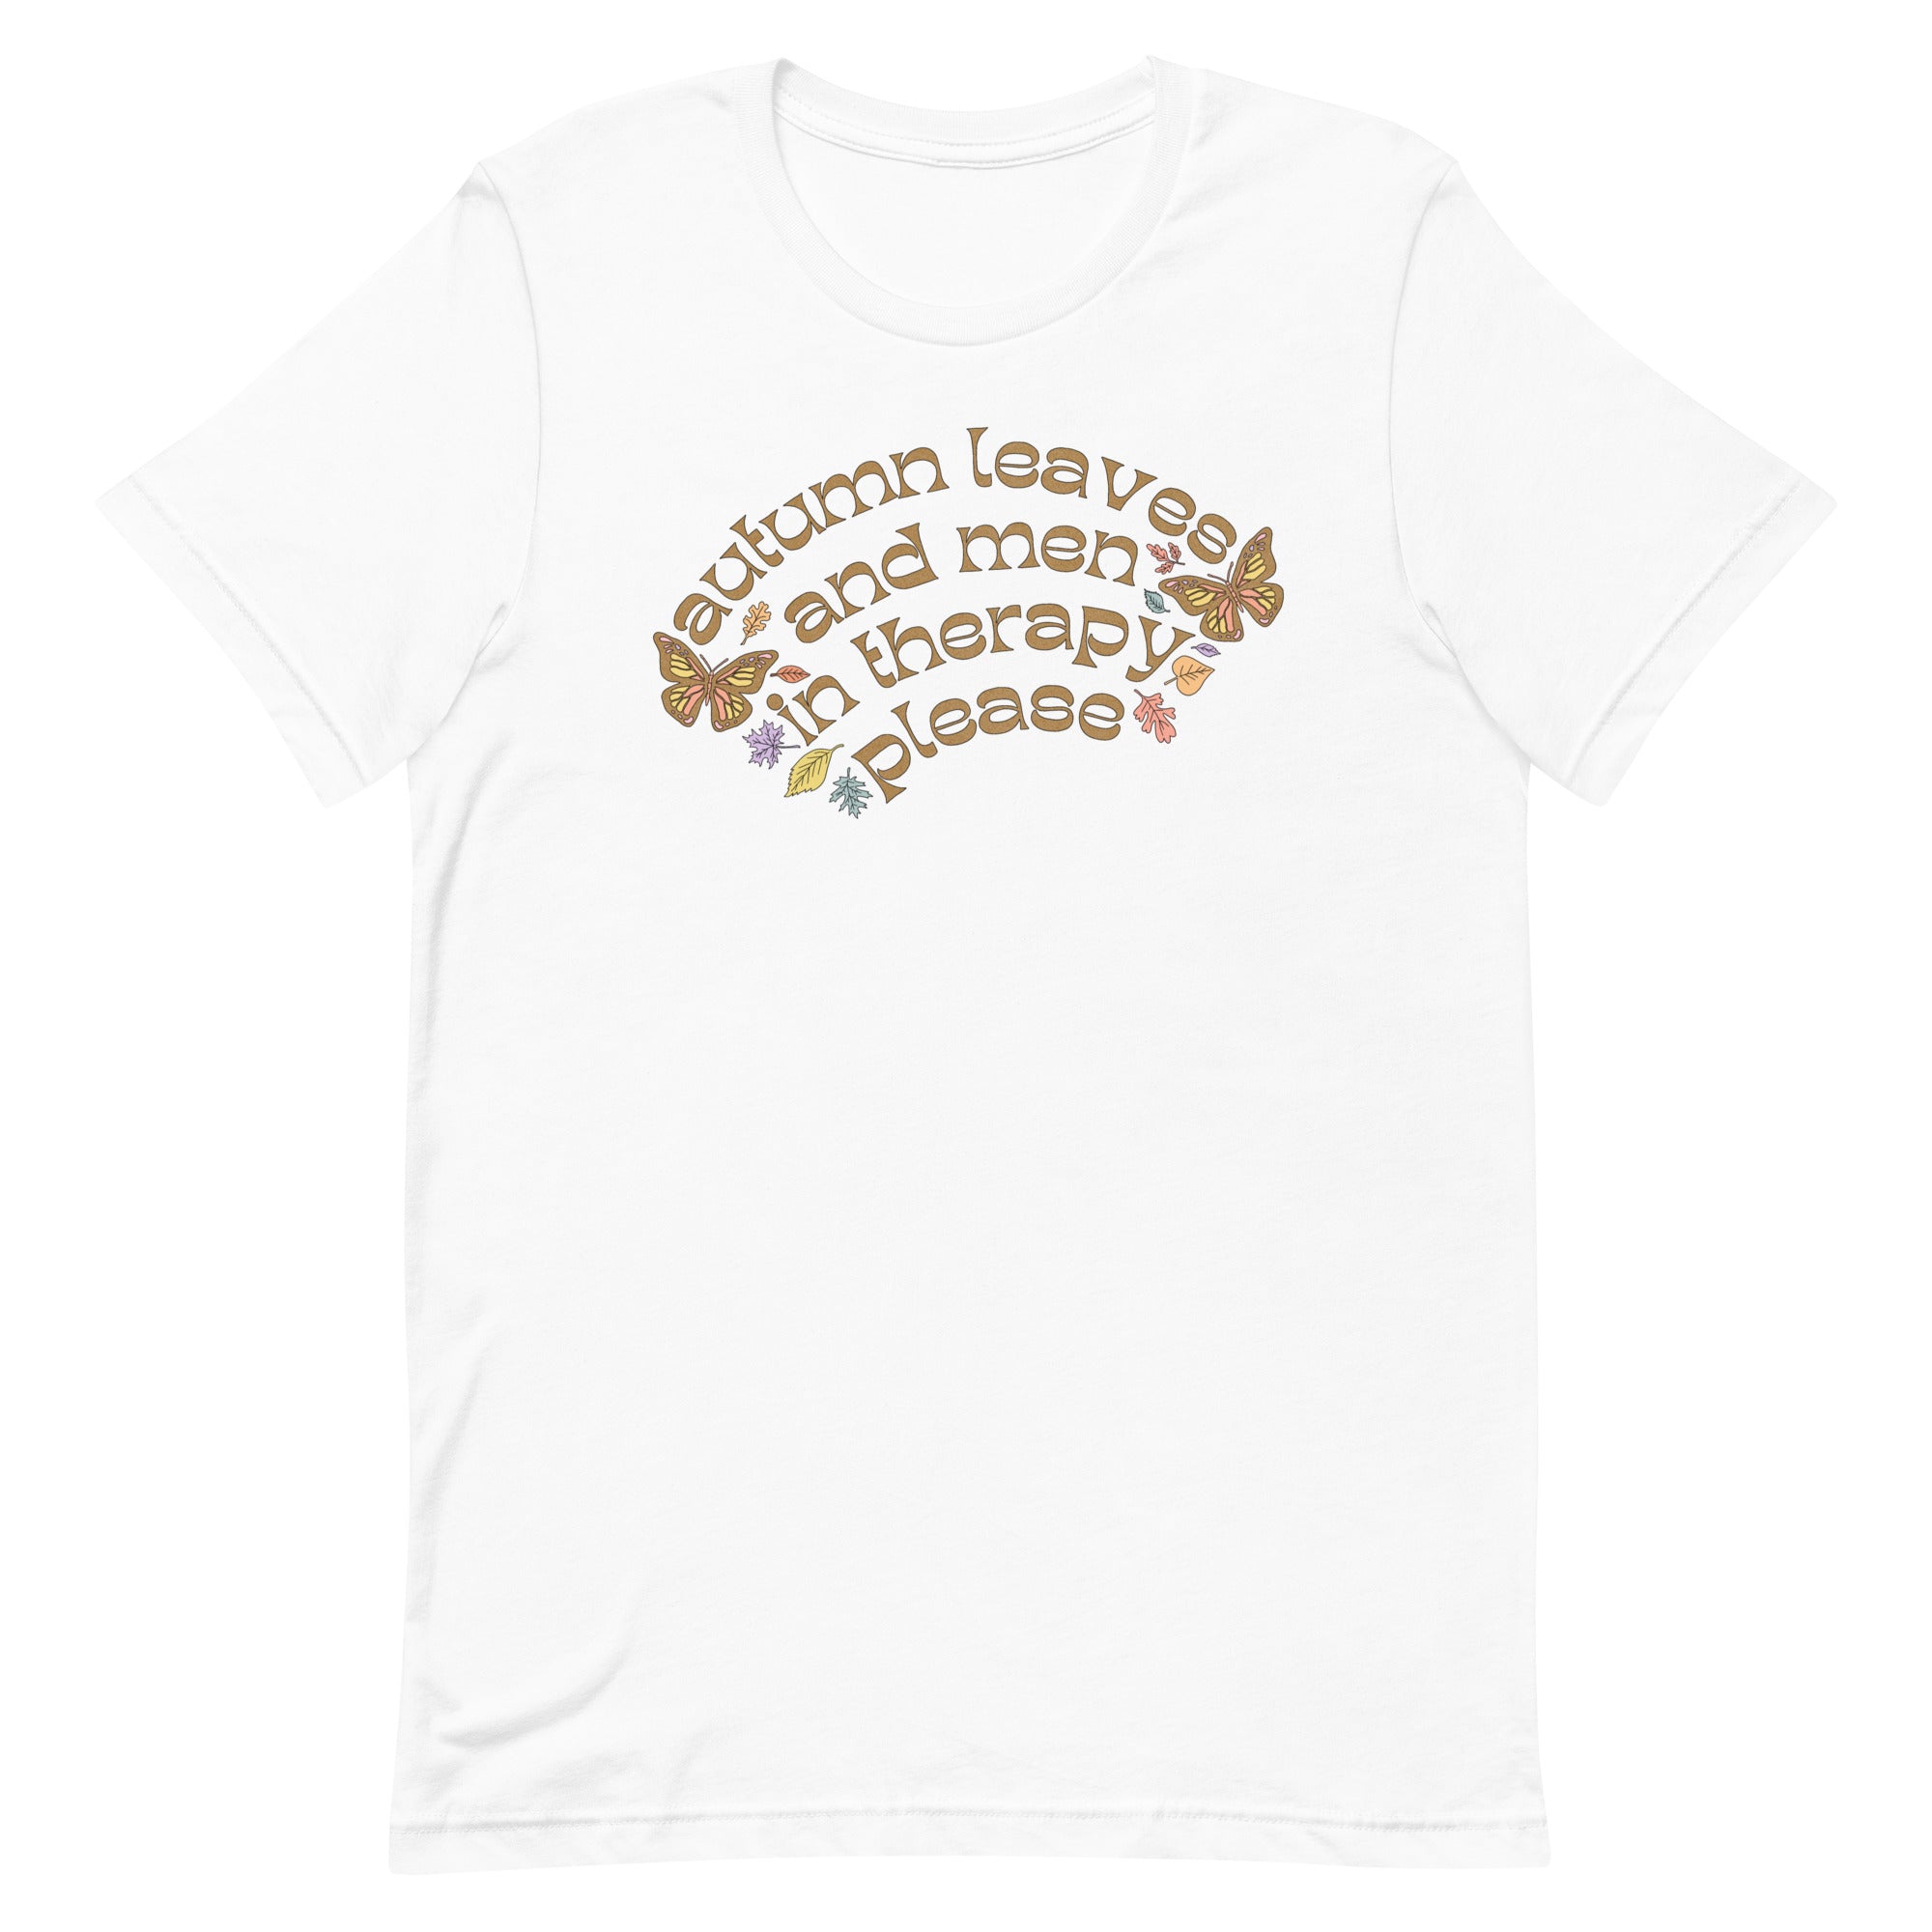 Autumn Leaves And Men In Therapy Please Unisex Feminist T-shirt - Shop Women’s Rights T-shirts - White